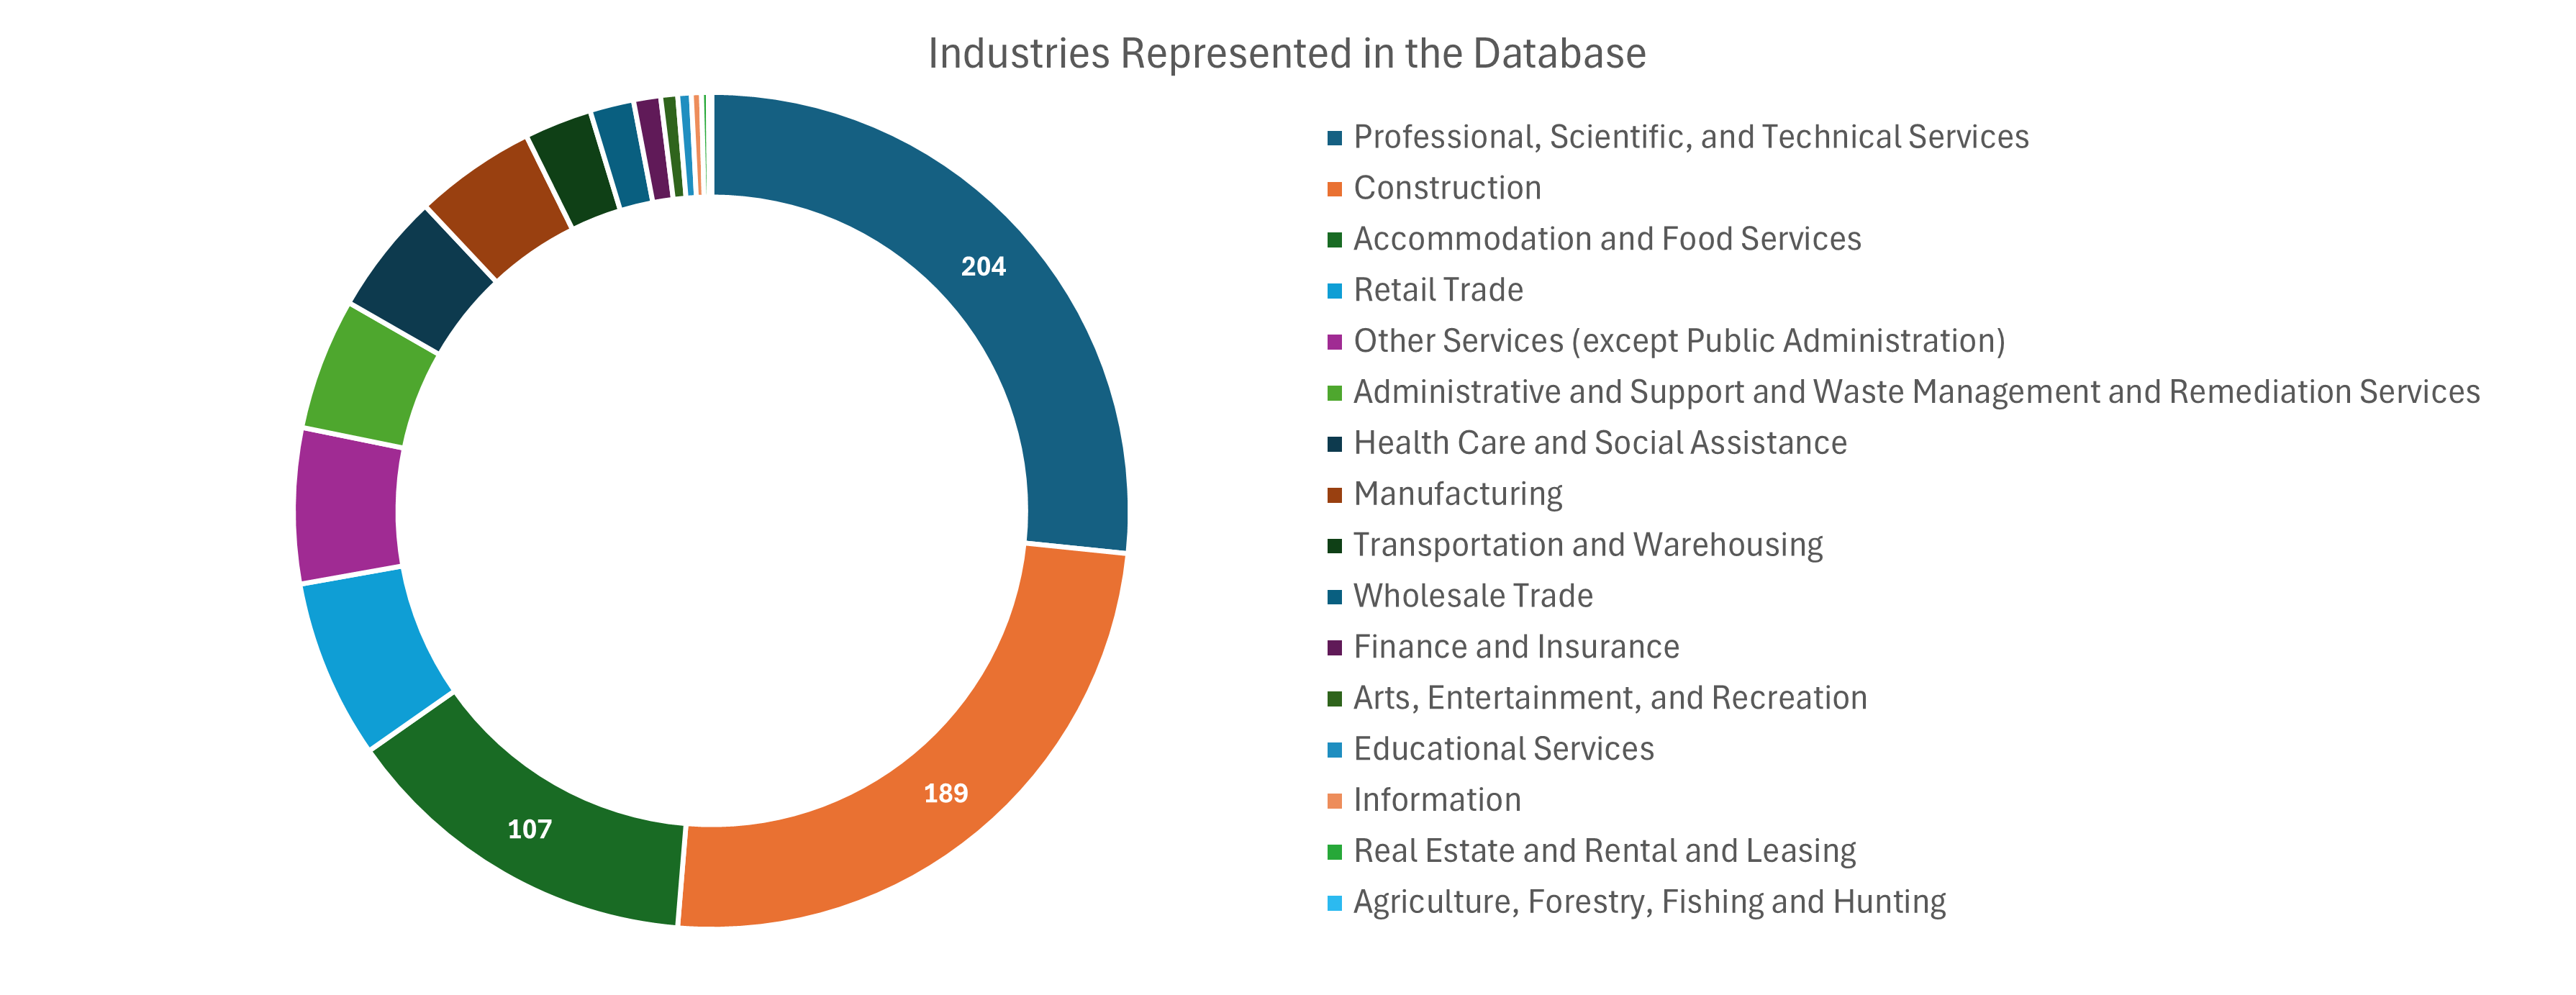 Industries Represented in the Database